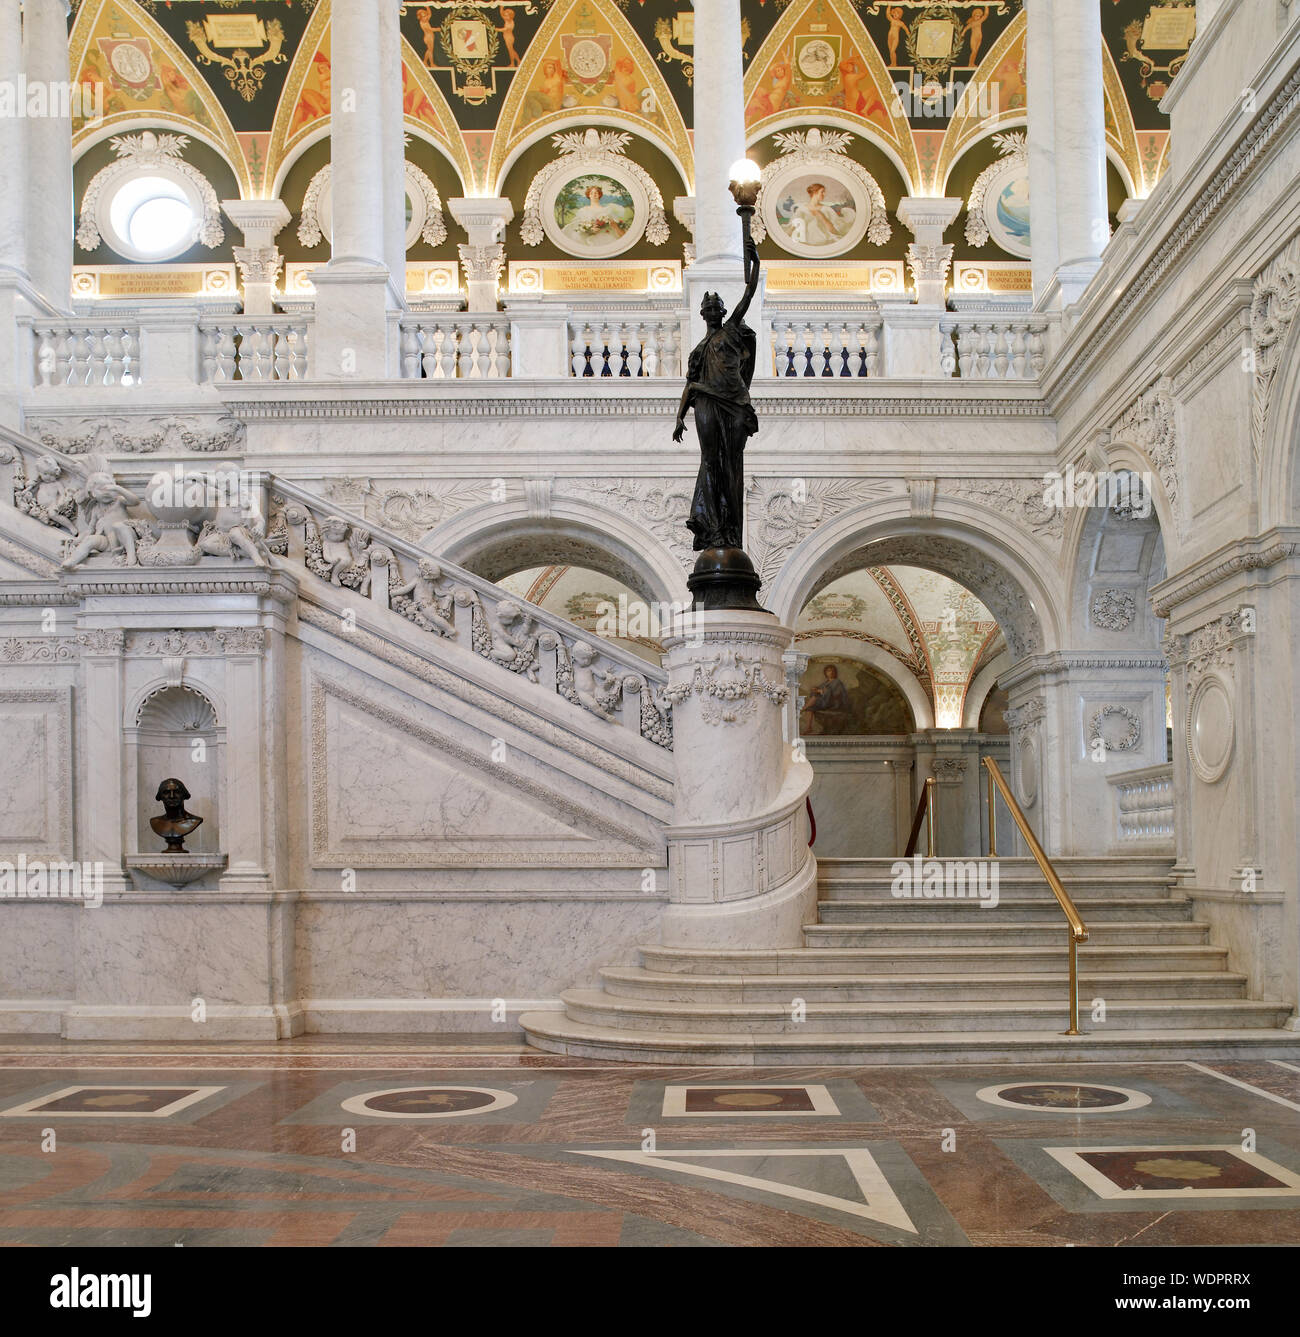 Great Hall. View of grand staircase and bronze statue of female figure on newel post holding a torch of electric light, with bust of George Washington at left. Library of Congress Thomas Jefferson Building, Washington, D.C. Stock Photo